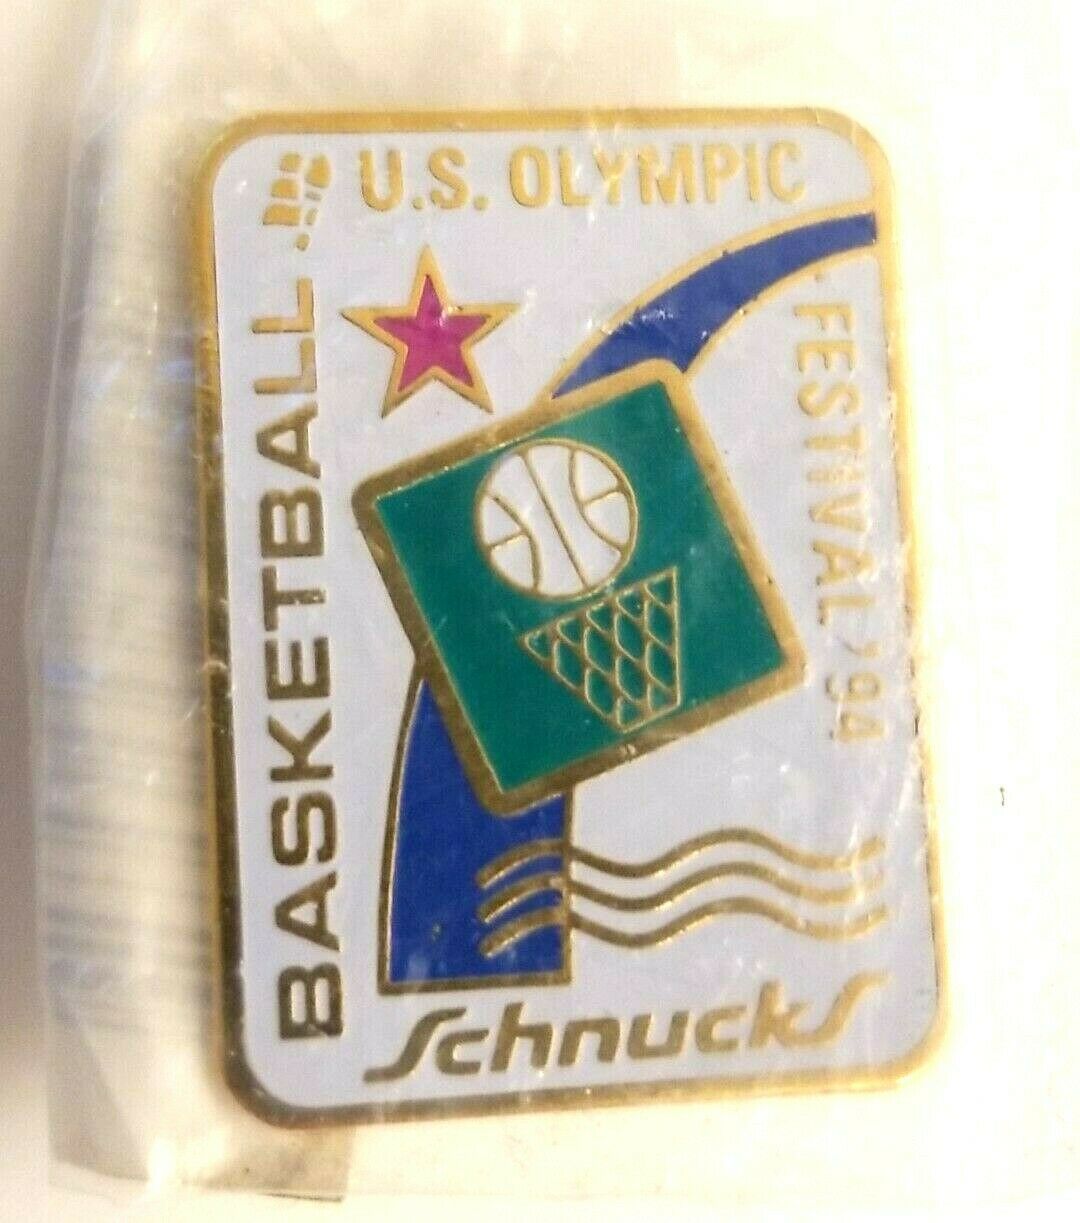 Primary image for VTG Collectible Pin - US Olympic Festival '94 Schnucks Basketball White... NIP